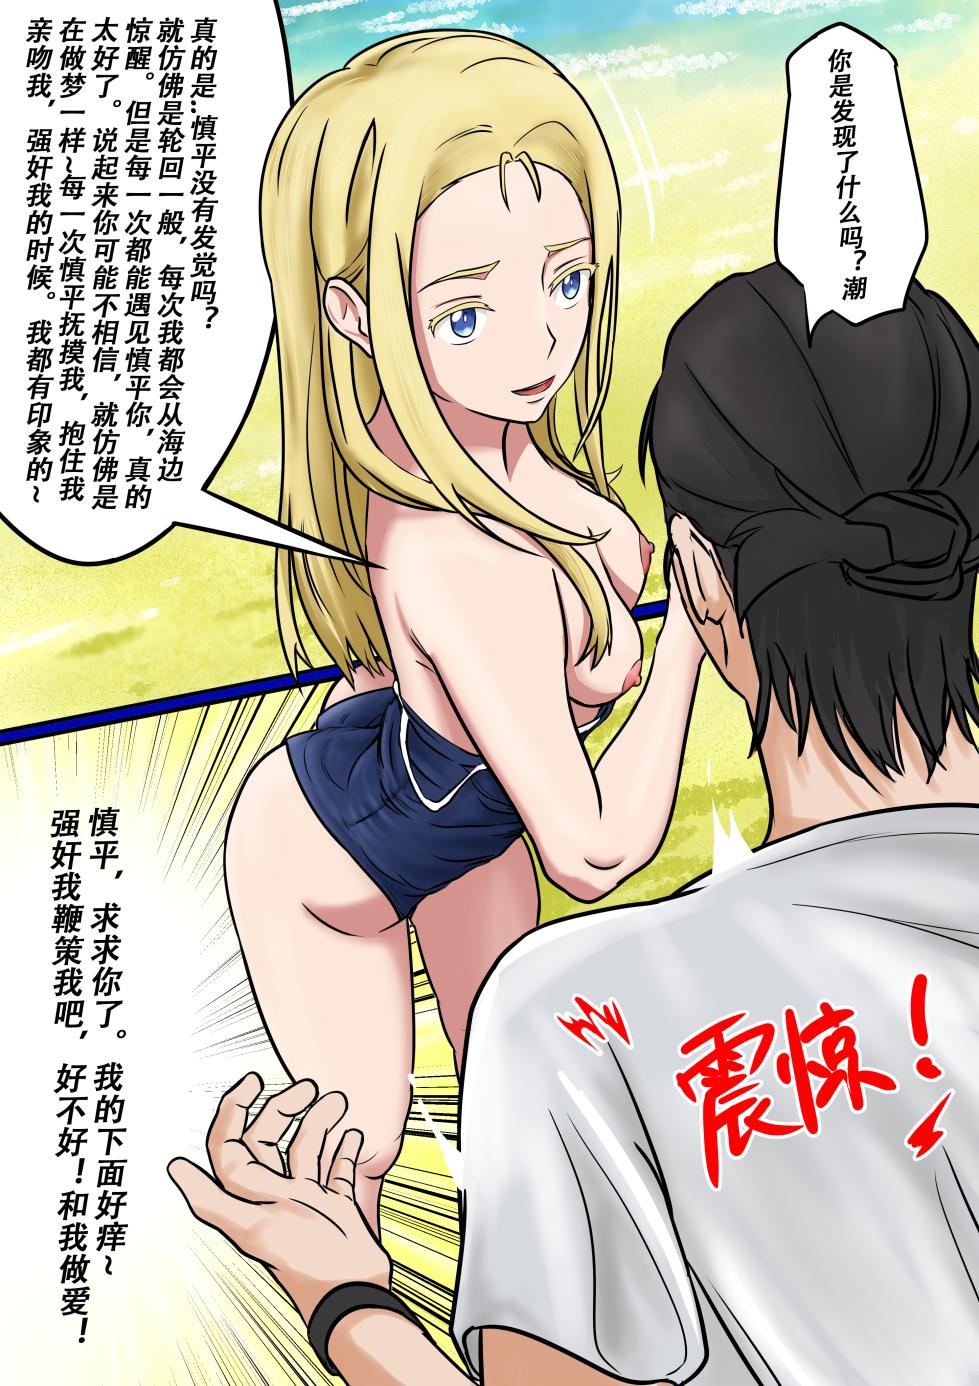 [KAO.YELLOW] Summertime Rendering - Sex with the Dead SP-1 [CN/JP/EN] - Page 12